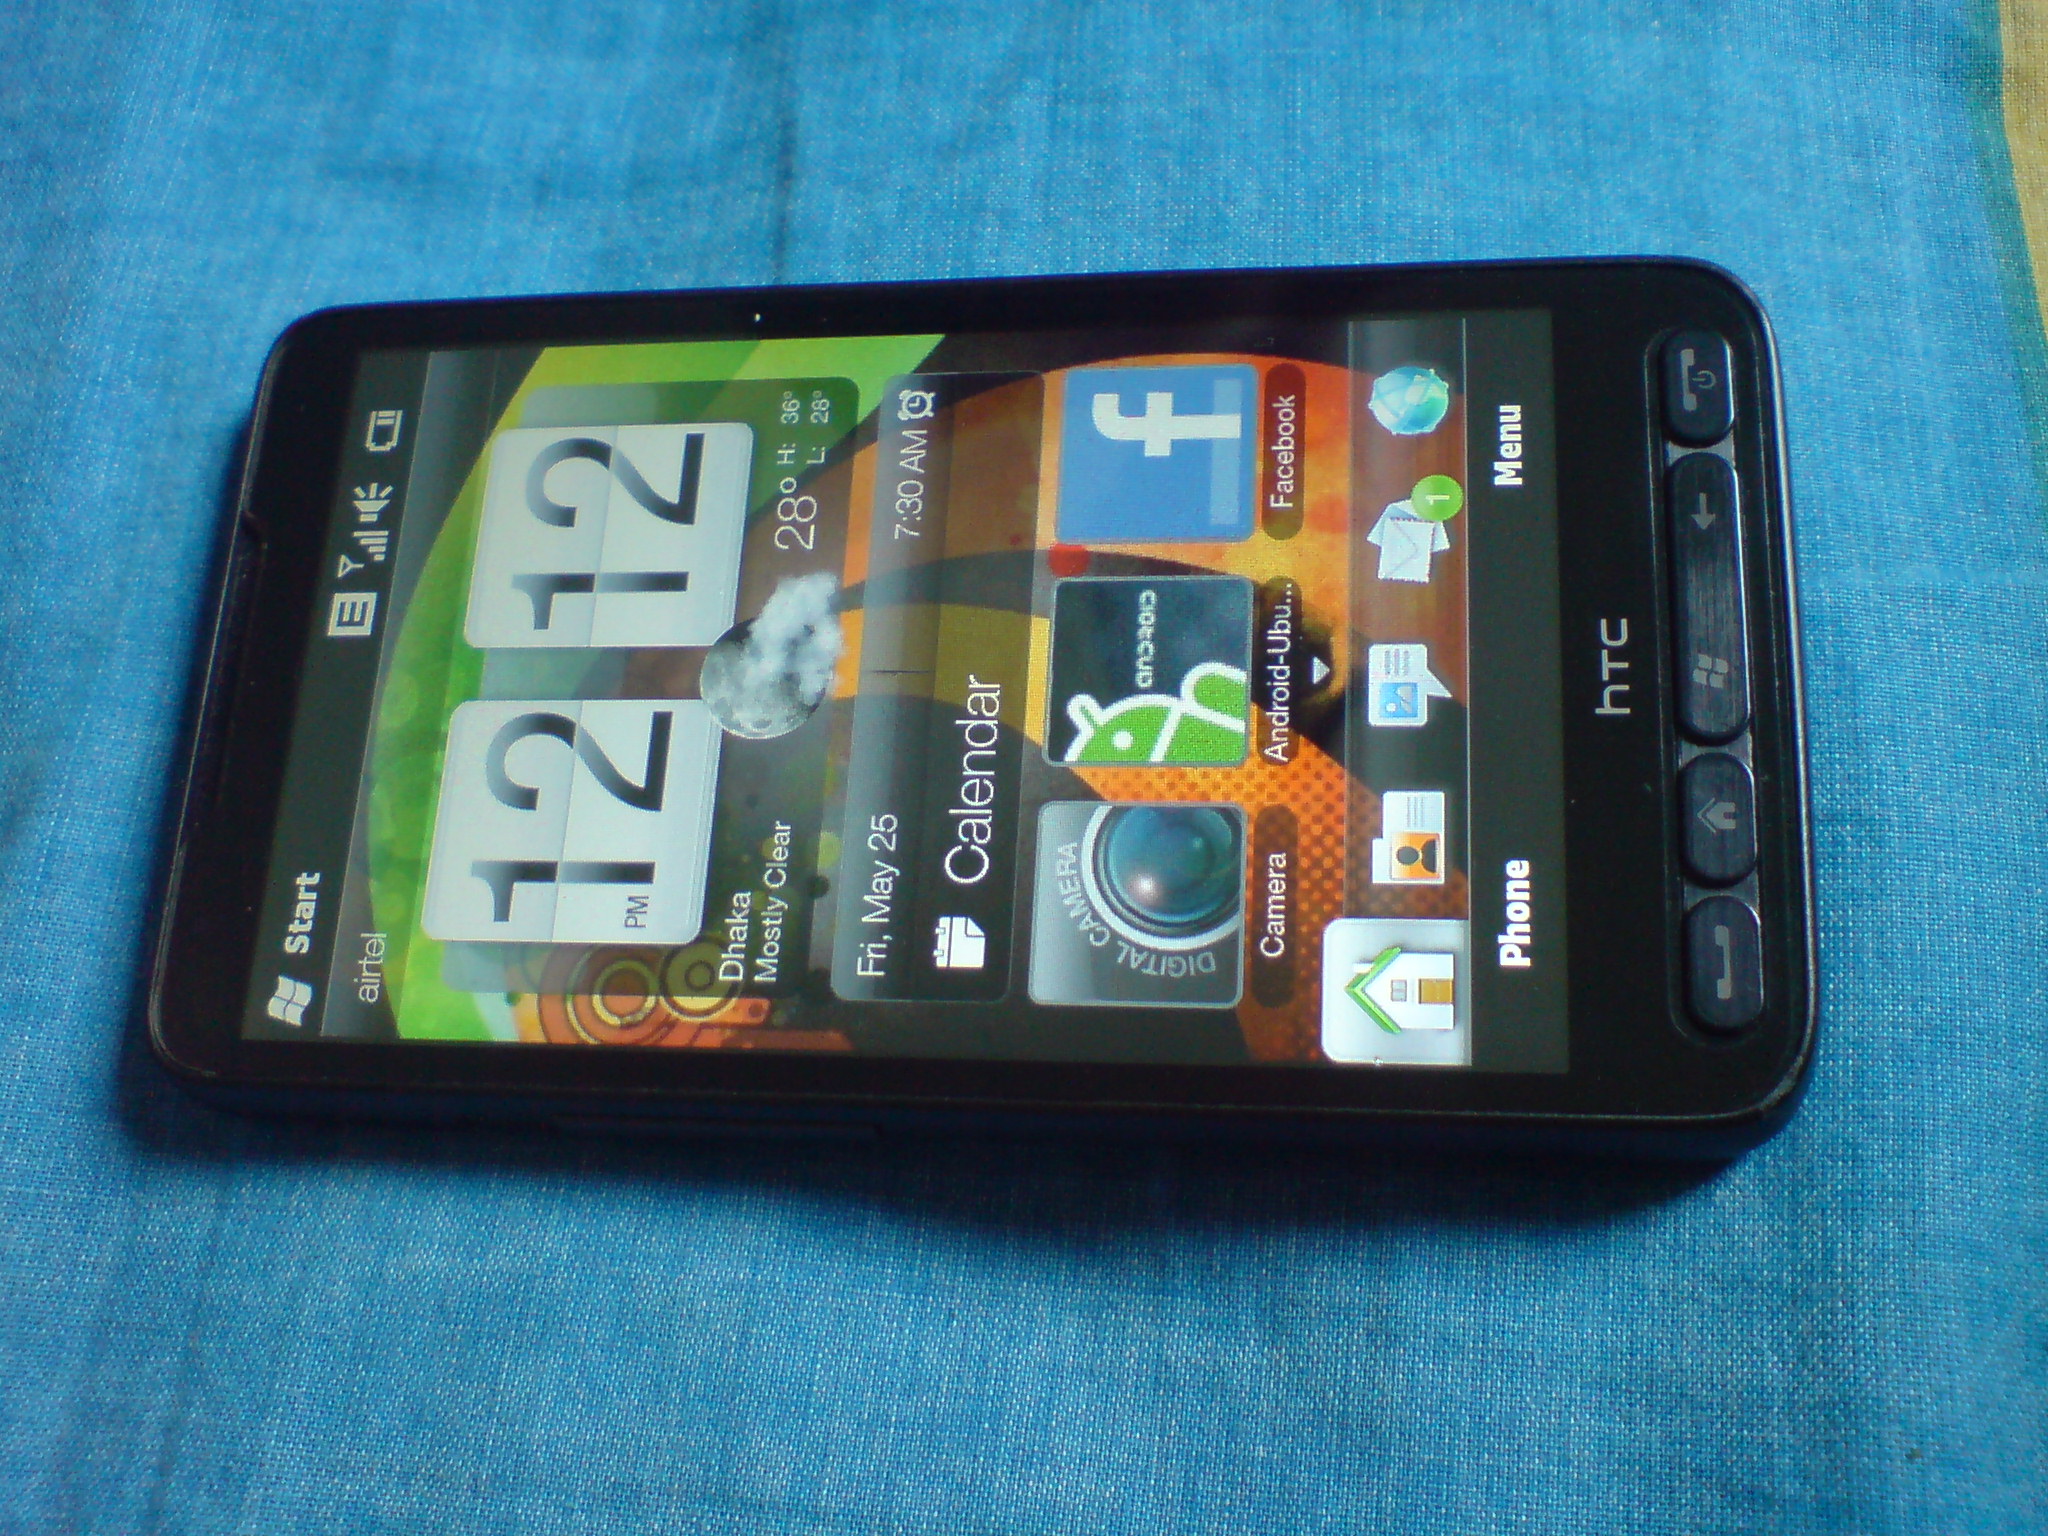 HTC HD2 Dual OS Windows 6.5 p. Android 2.3.1 Gingerbread large image 0